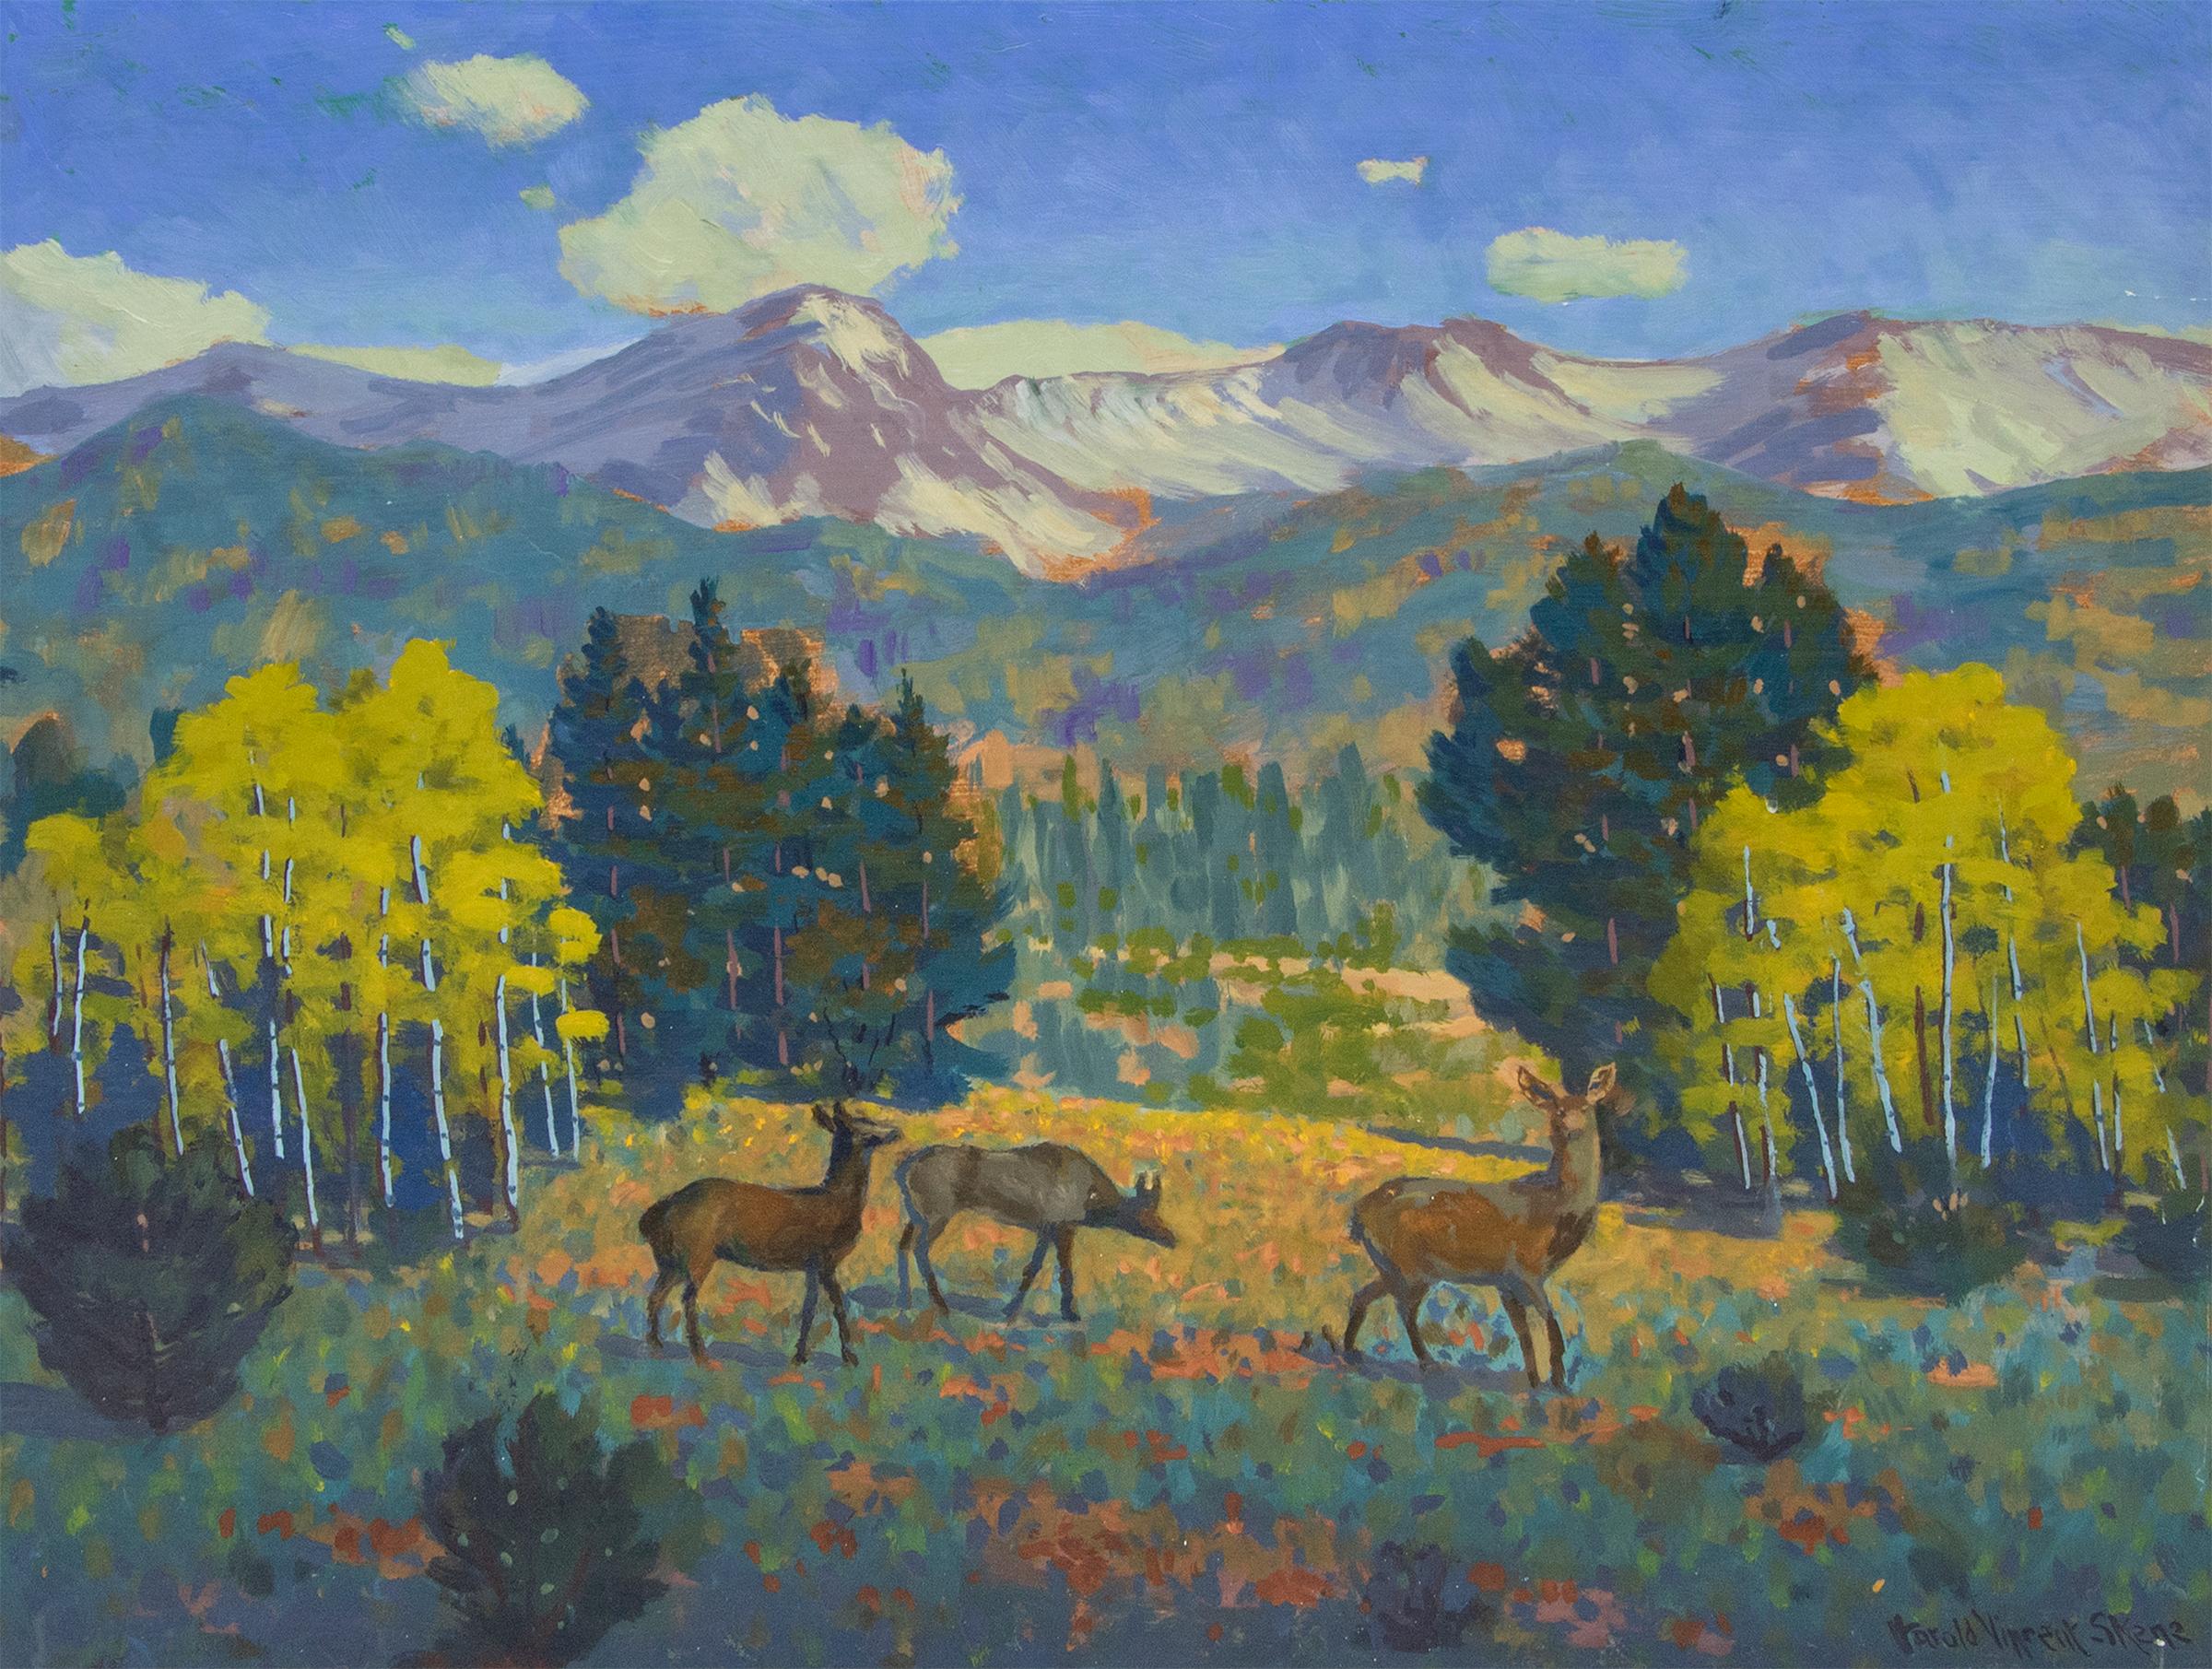 'Threesome' - 1960s Vintage Mountain Landscape Painting, Deer in Yellowstone For Sale 2